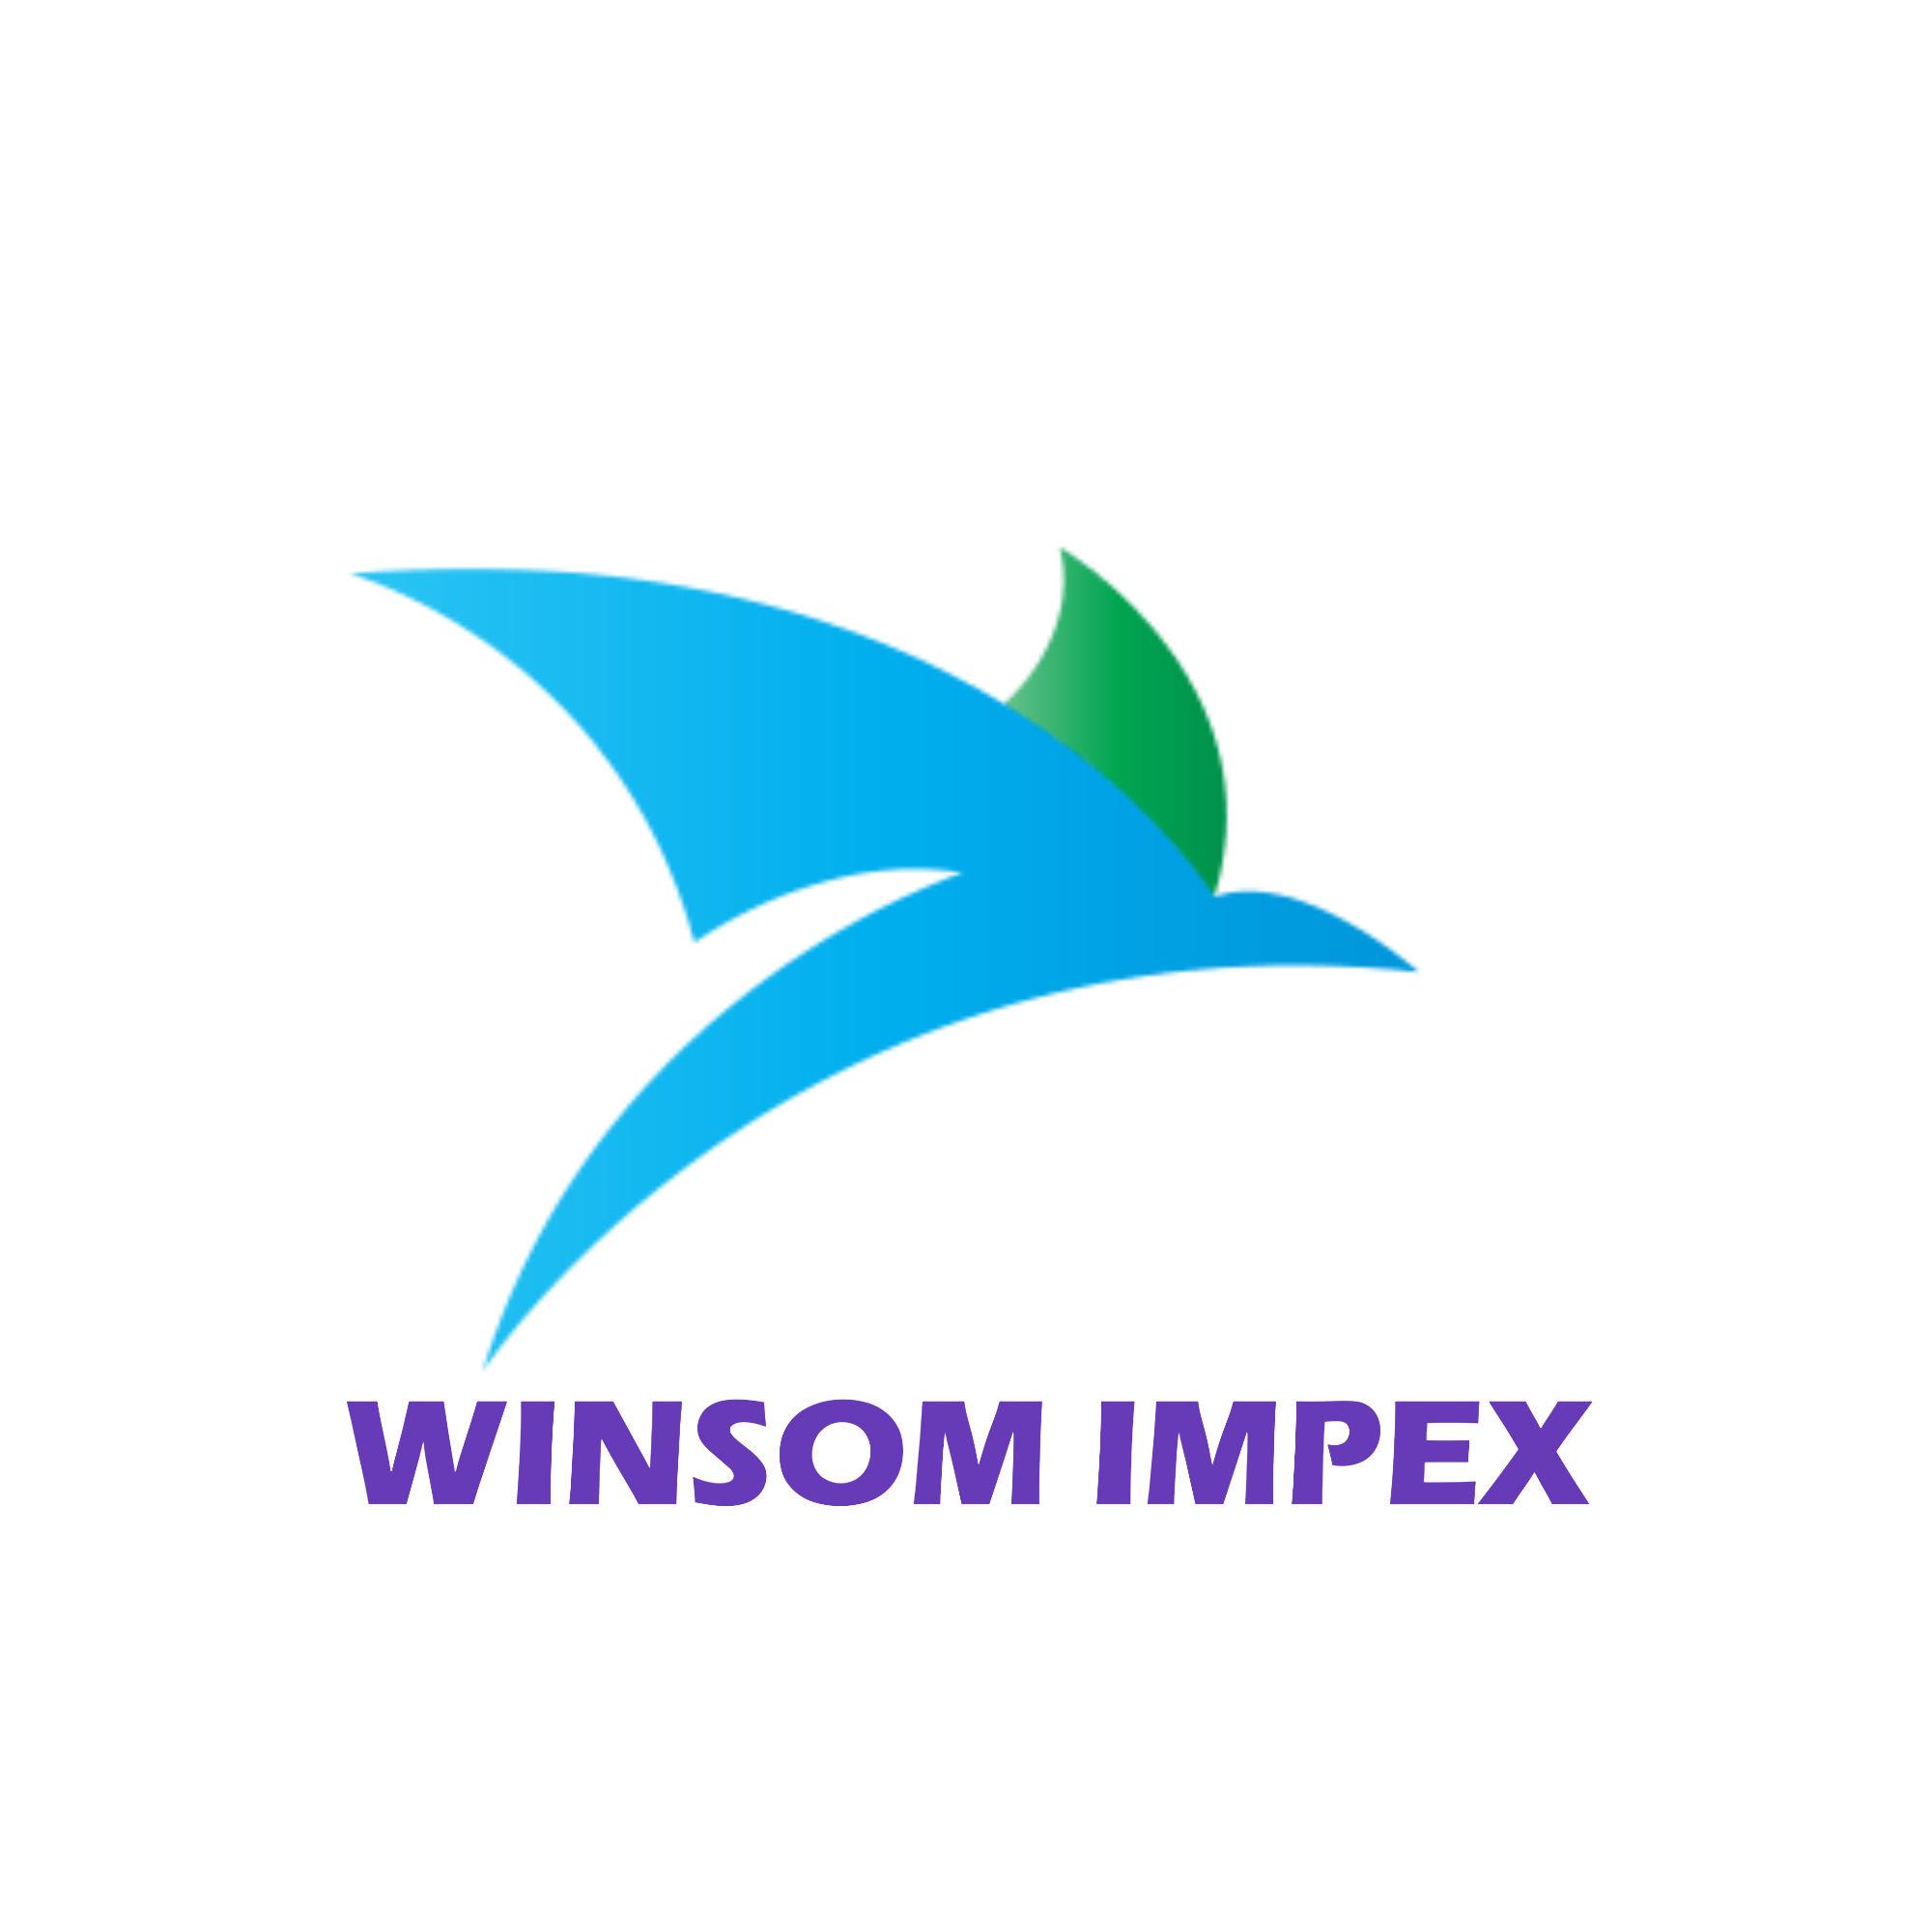 WINSOM IMPEX